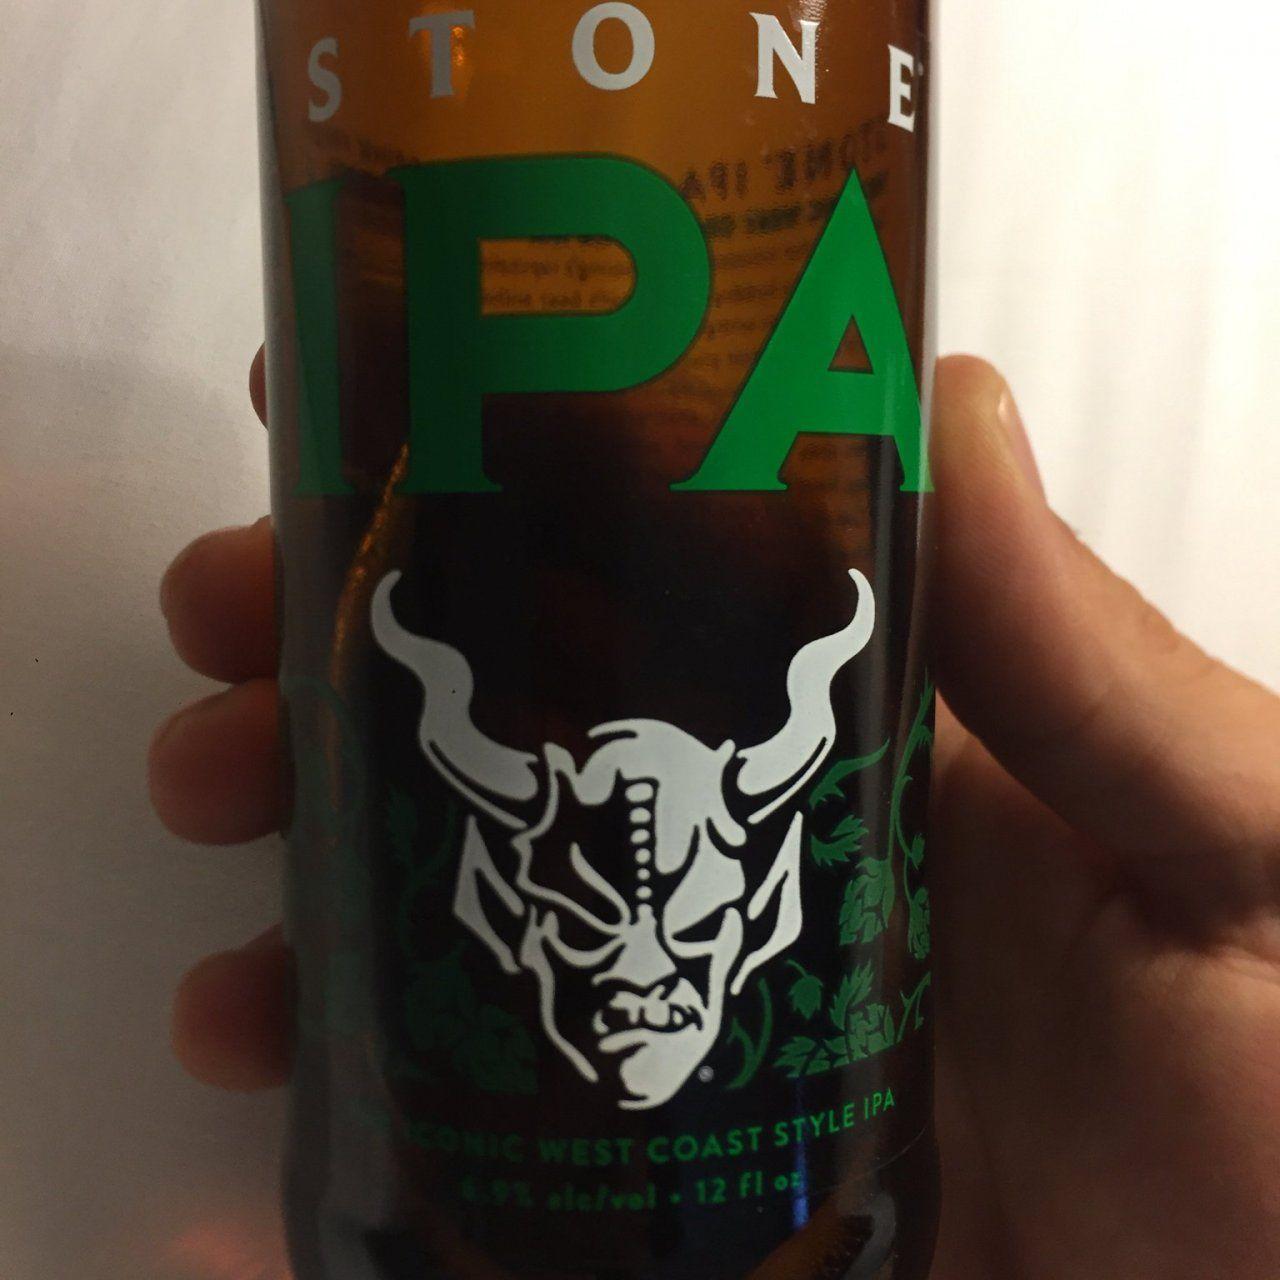 Grand Canyon IPA Logo - Red Roof PLUS+ Williams - Grand Canyon - Williams, AZ - Venue | Untappd